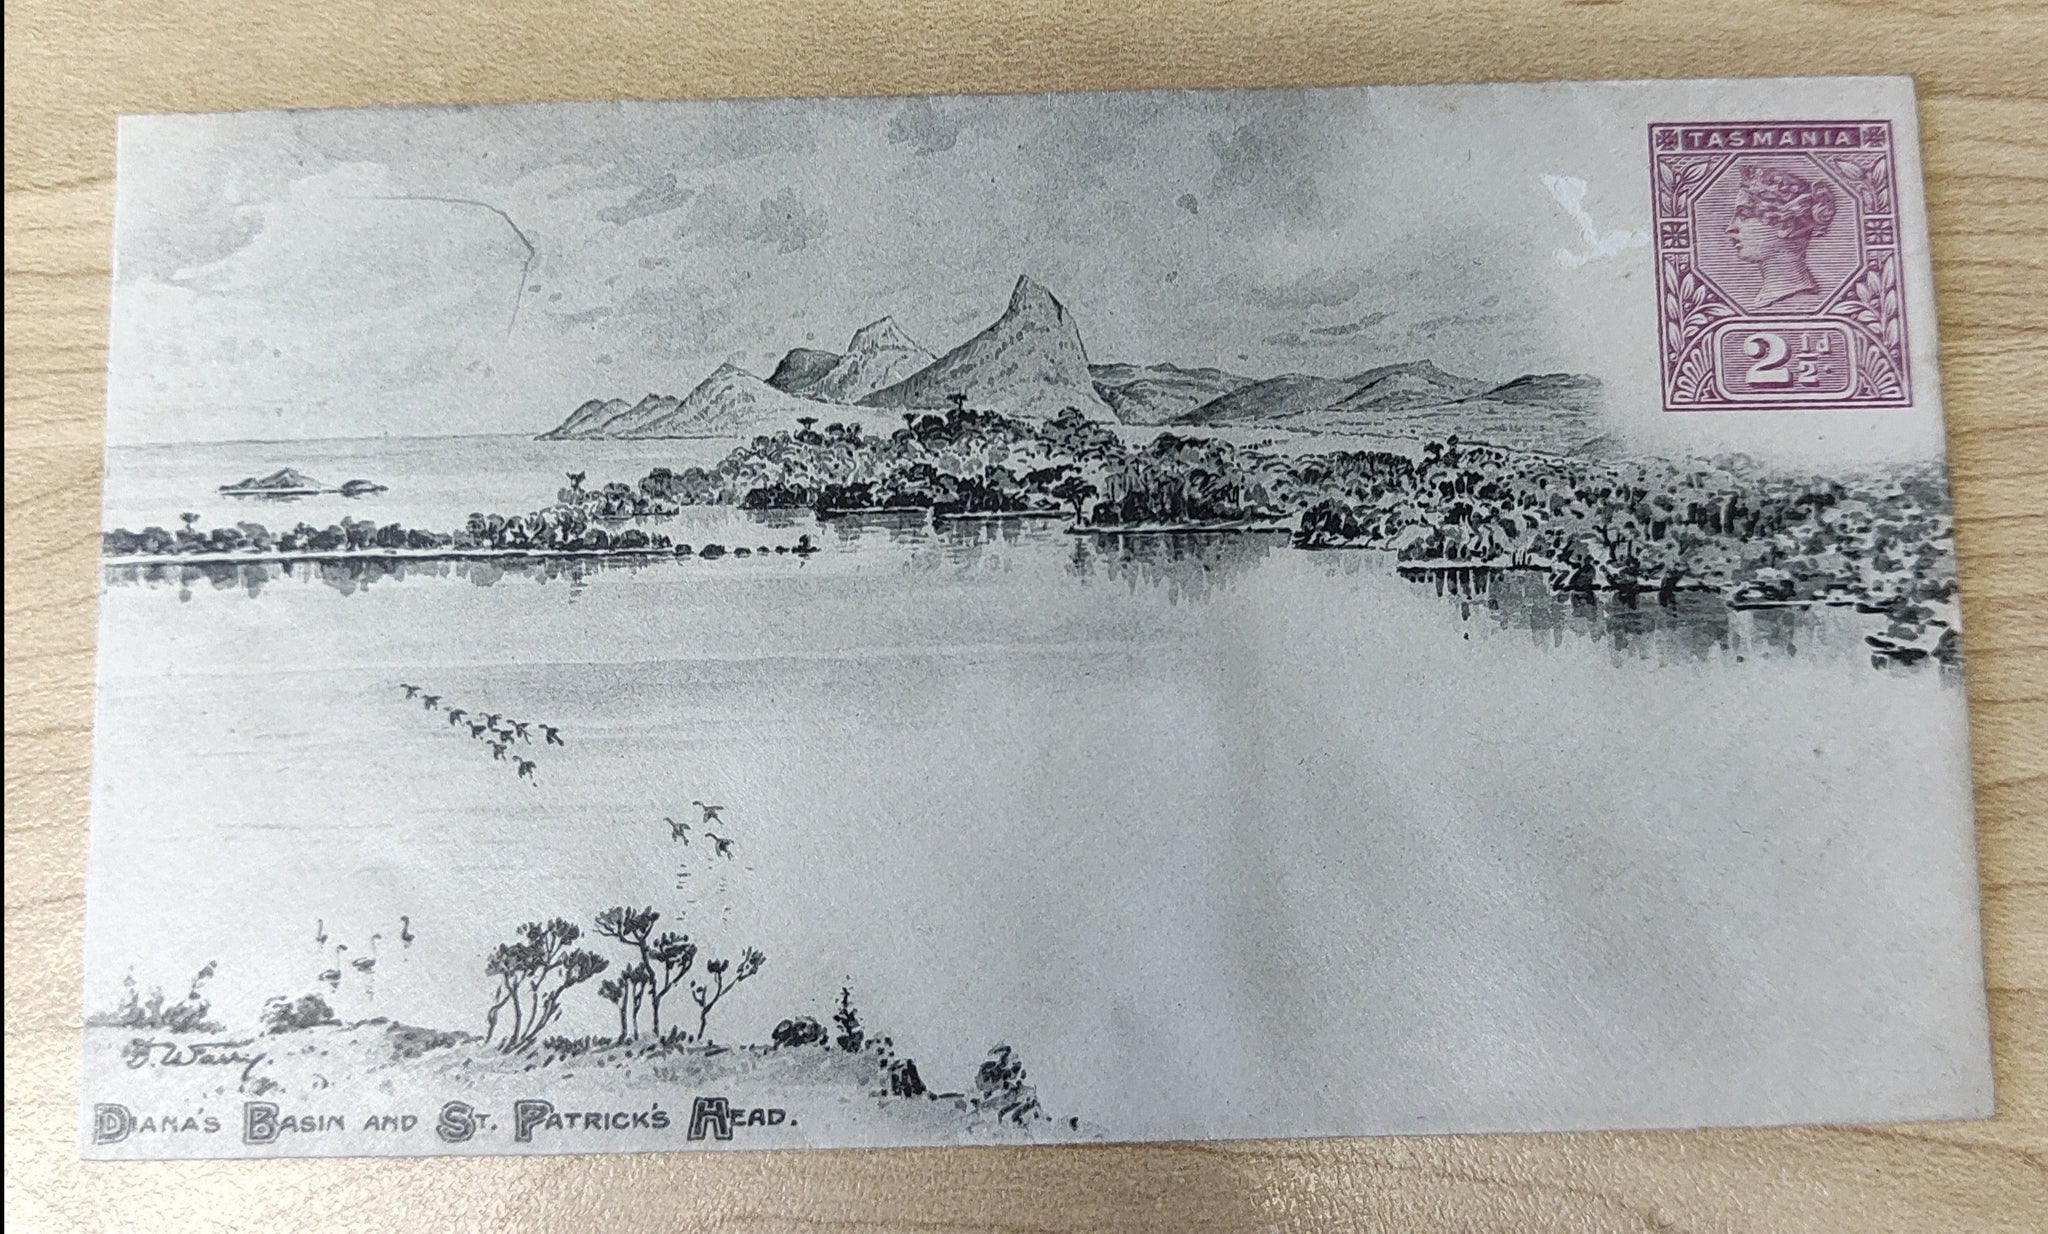 Tasmania 1898 2½d  Envelope with view "Diana Basin and St Patrick's Head"